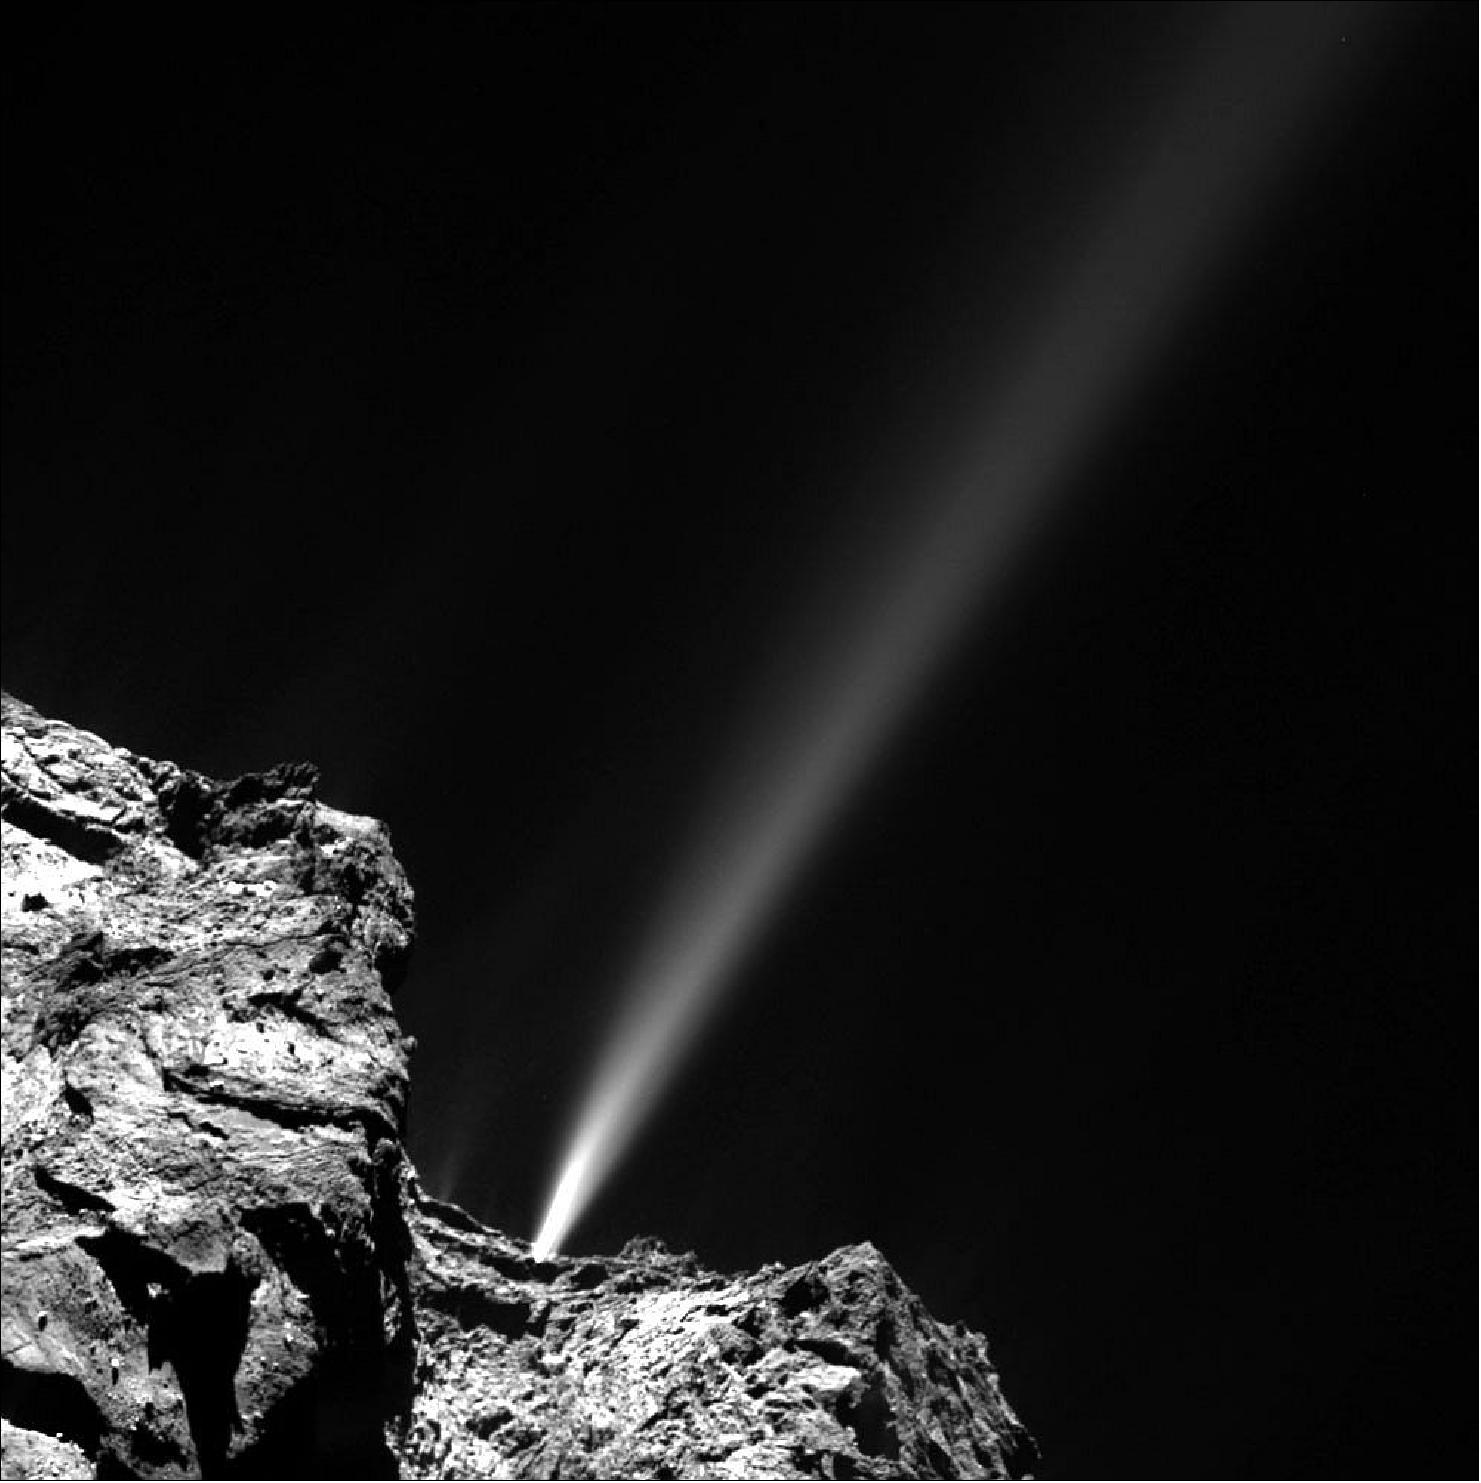 Figure 129: Rosetta’s scientific camera OSIRIS shows the sudden onset of a well-defined jet-like feature emerging from the side of the comet’s neck, in the Anuket region on July 29, 2015 (image credit: ESA/Rosetta/MPS for OSIRIS Team MPS/UPD/LAM/IAA/SSO/INTA/UPM/DASP/IDA)